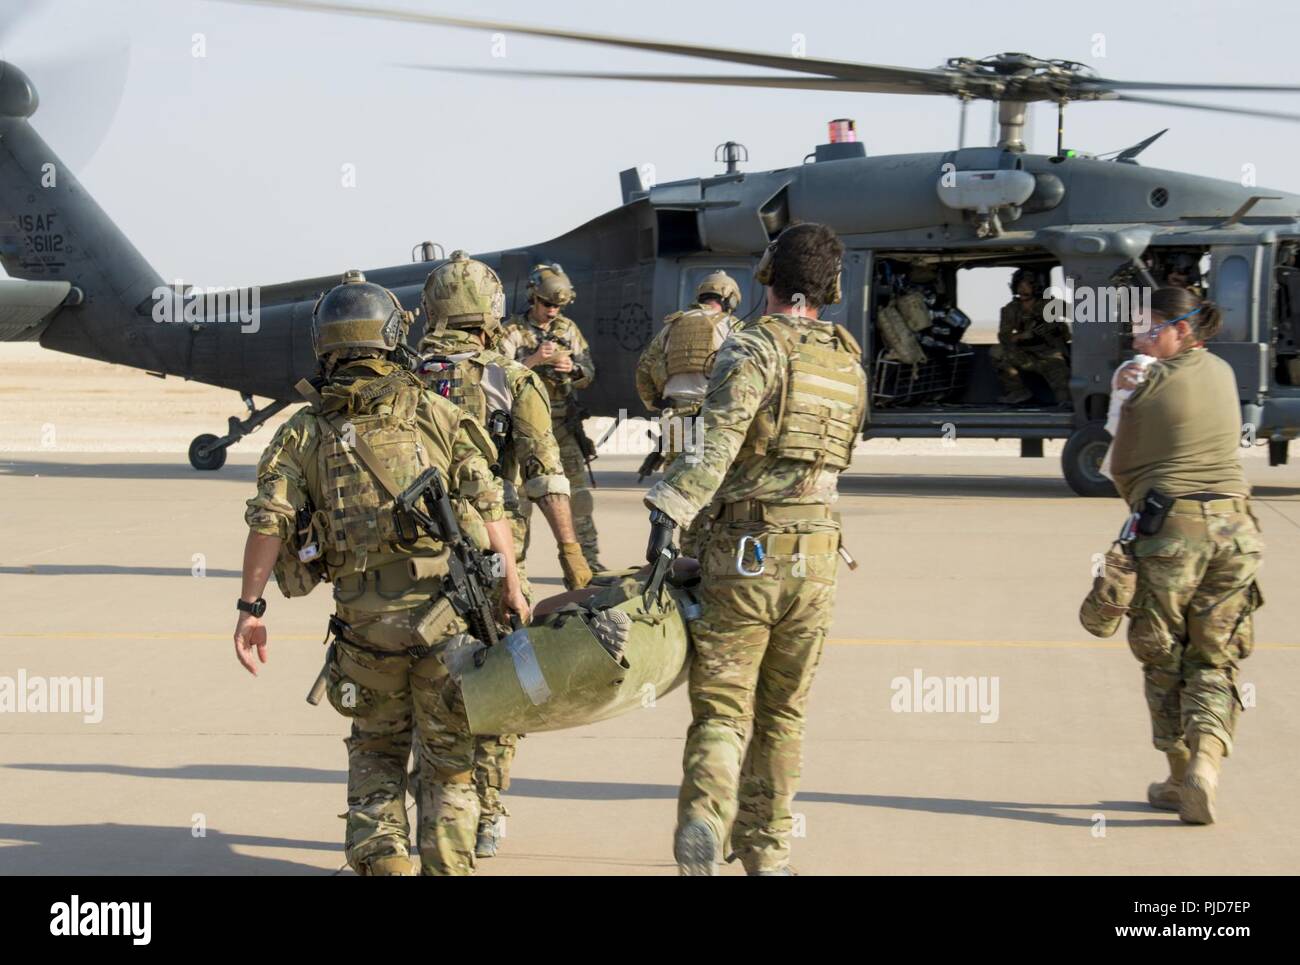 Battlefield Airmen assigned to the 52nd Expeditionary Rescue Squadron transport exercise role players to an HH-60 Pave Hawk assigned to the 46th Expeditionary Rescue Squadron after a simulated aircraft crash during a combat search and rescue training (CSAR) exercise at a dirt landing strip in Iraq, July 15, 2018. The CSAR exercise was conducted to help validate required training to perform mission taskings and utilization of the various assets on a large scale. Battlefield Airmen assigned throughout the combined joint operational area conduct operations in support of Combined Joint Task Force  Stock Photo